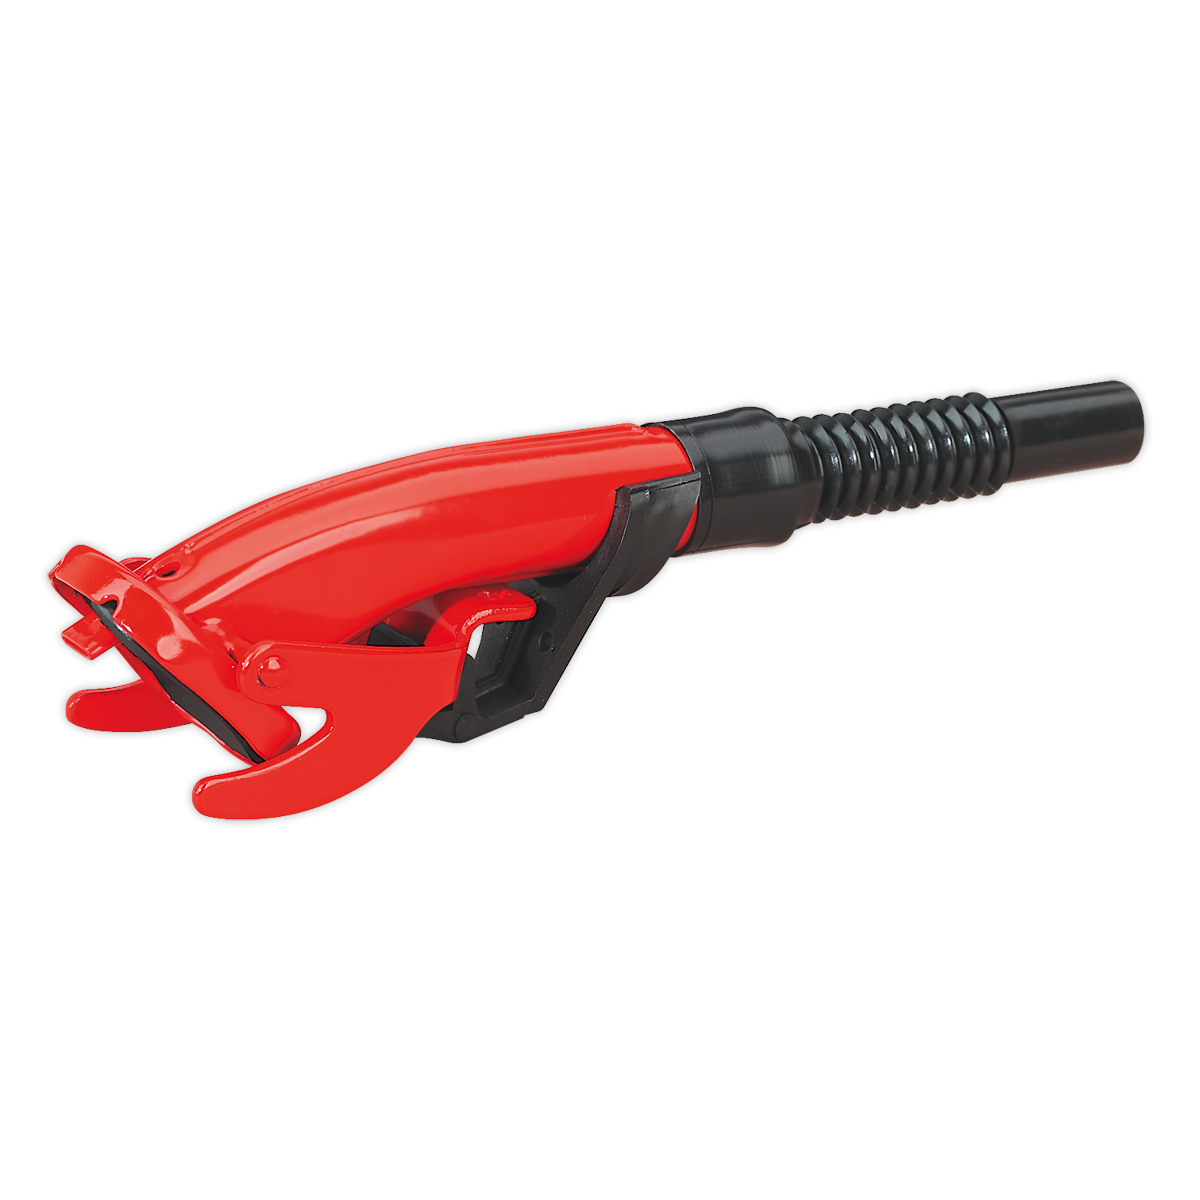 Sealey Pouring Spout - Red for JC5MR, JC10, JC20